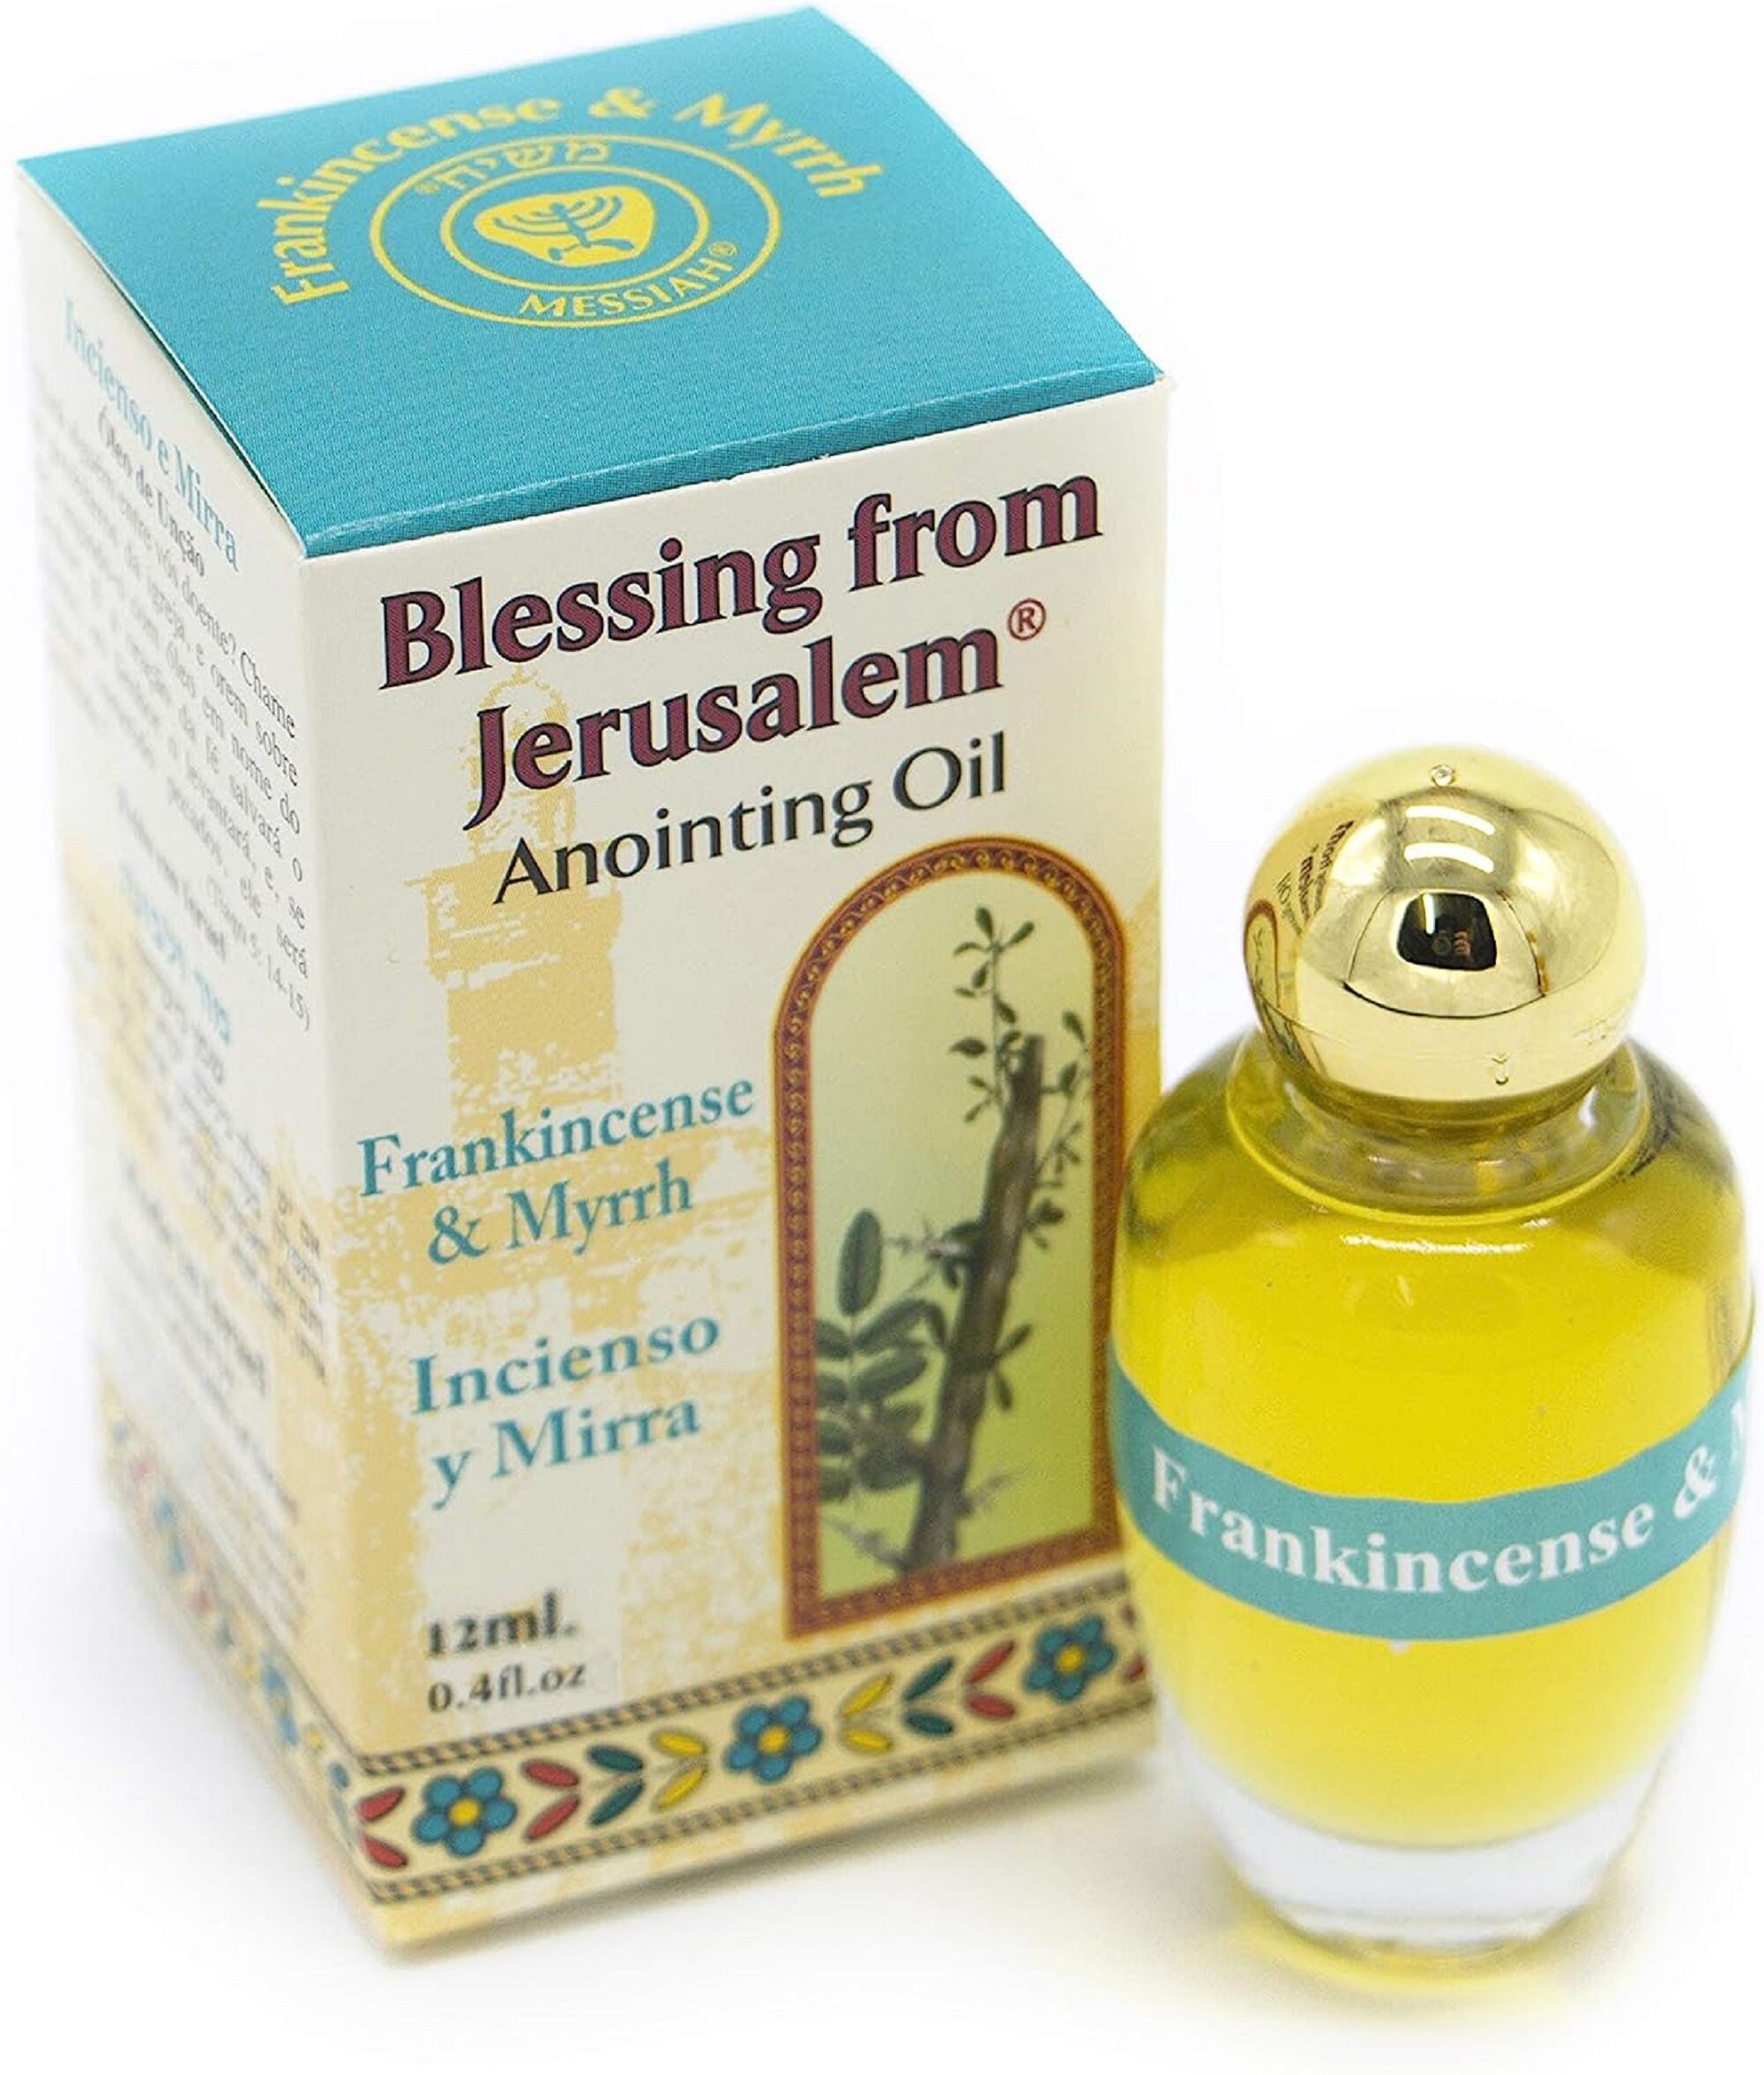 Frankincense and Myrrh Anointing Oil: Blessing From Jerusalem